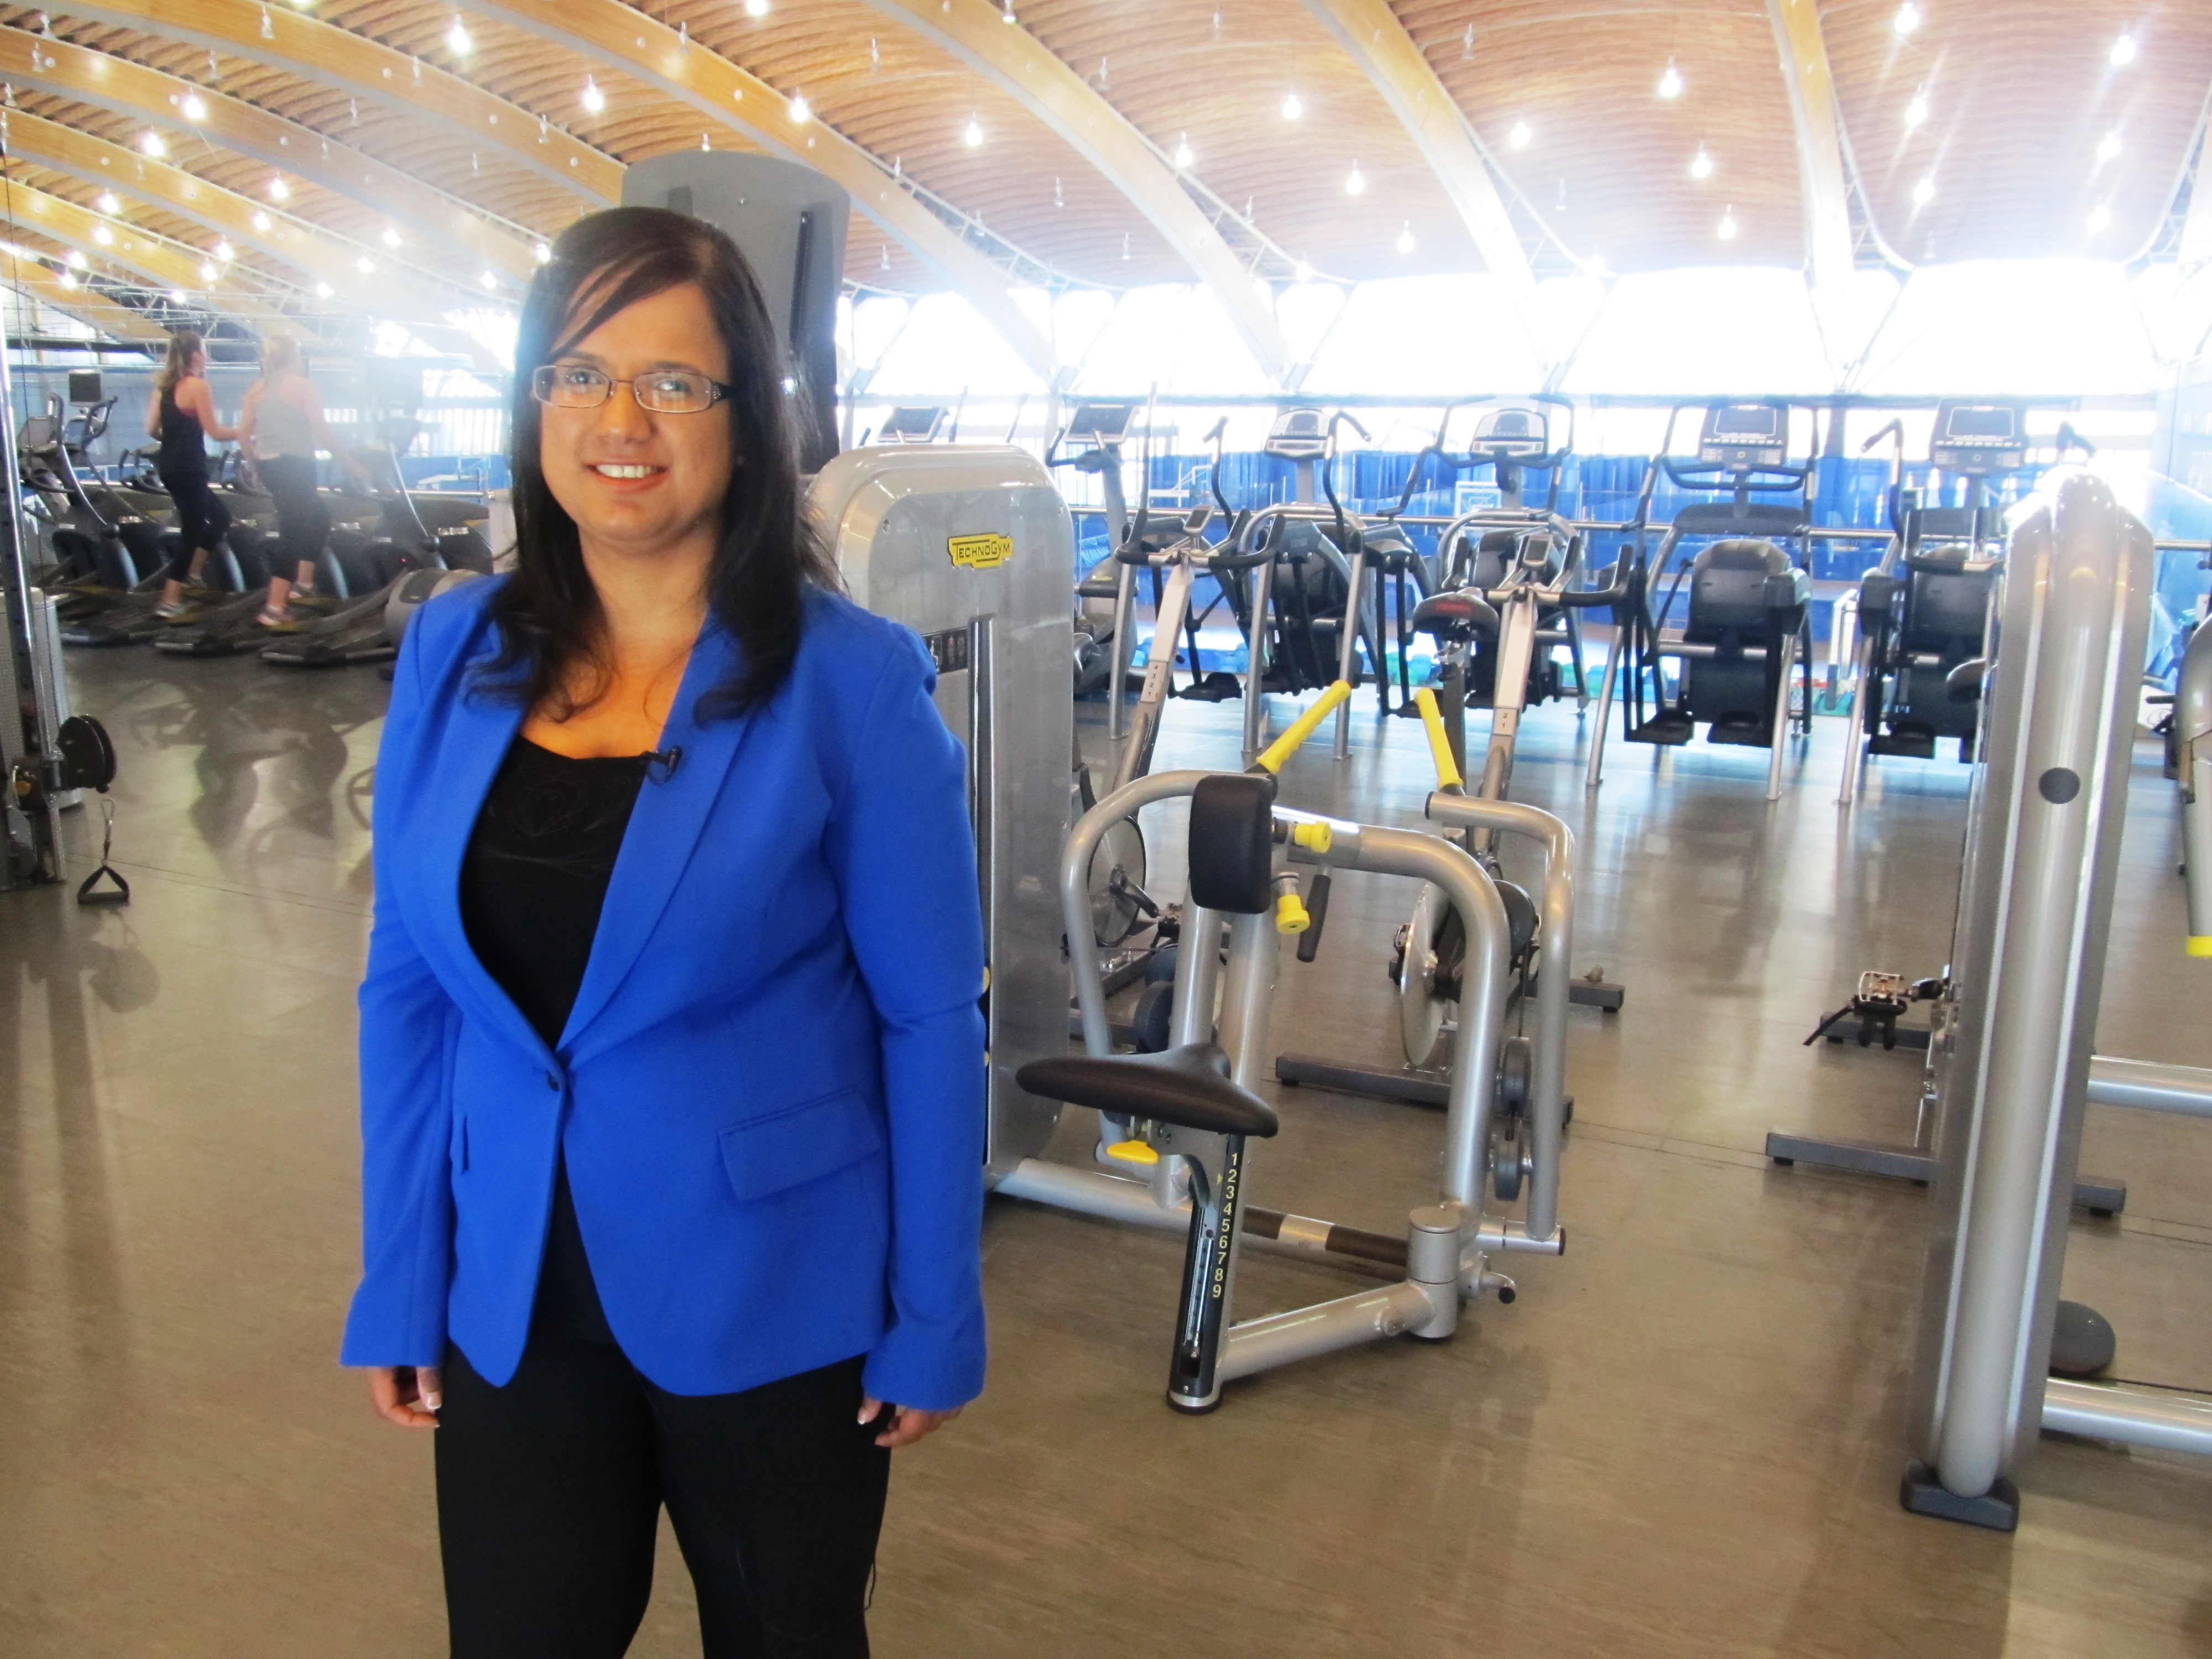 Kristy at the accessible gym